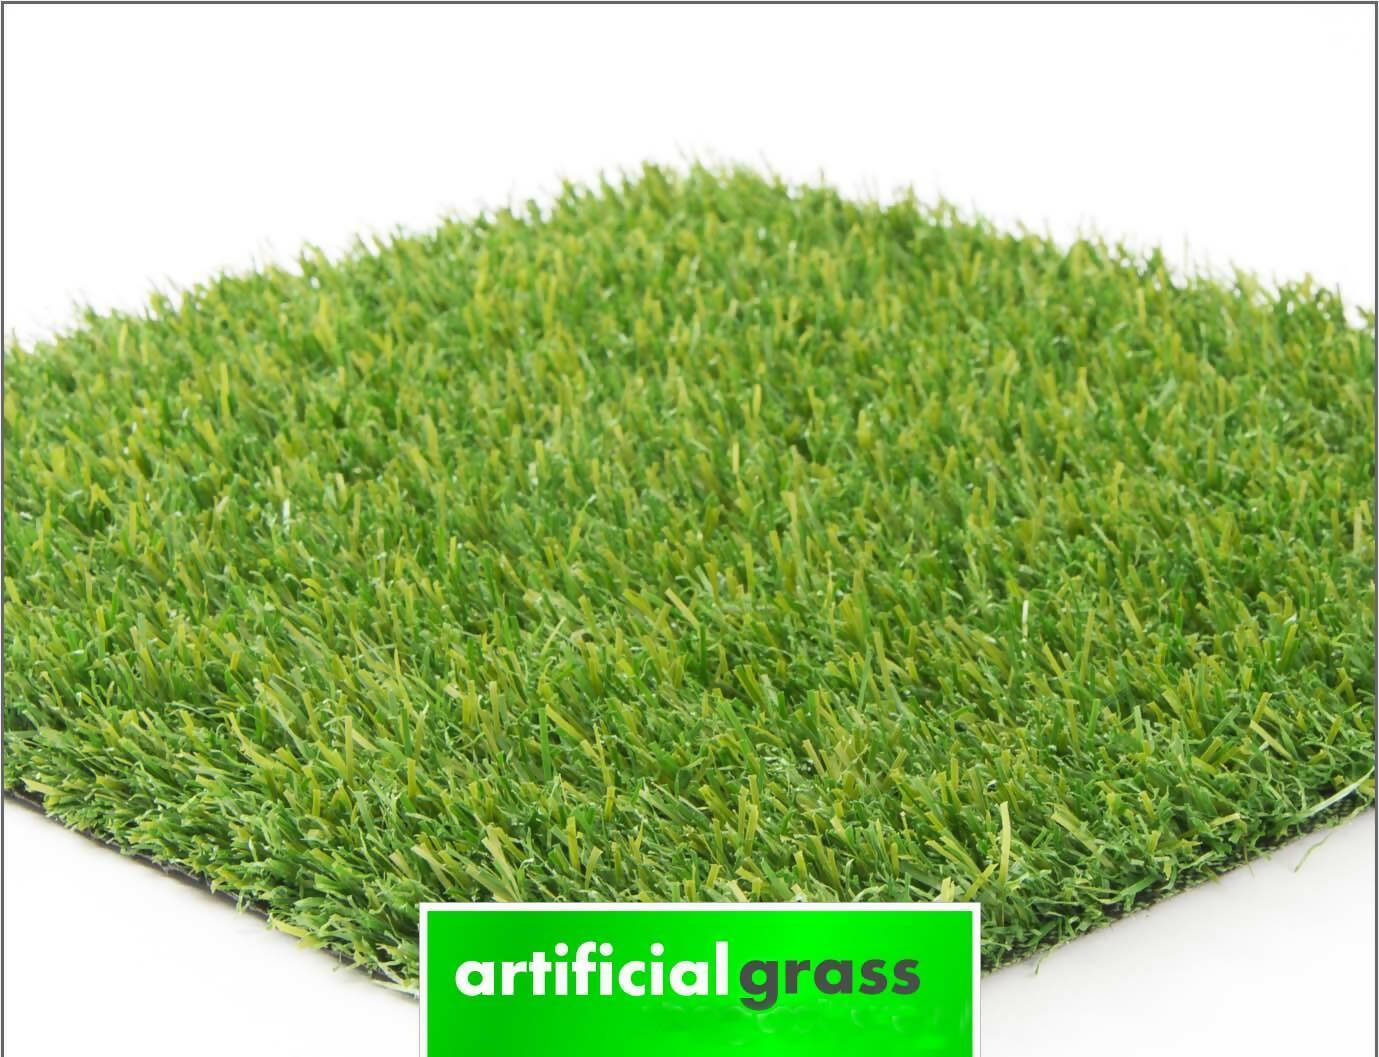 Artificial Grass Mat For Aquarium & Multipurpose Household 1ft by 1ft Size